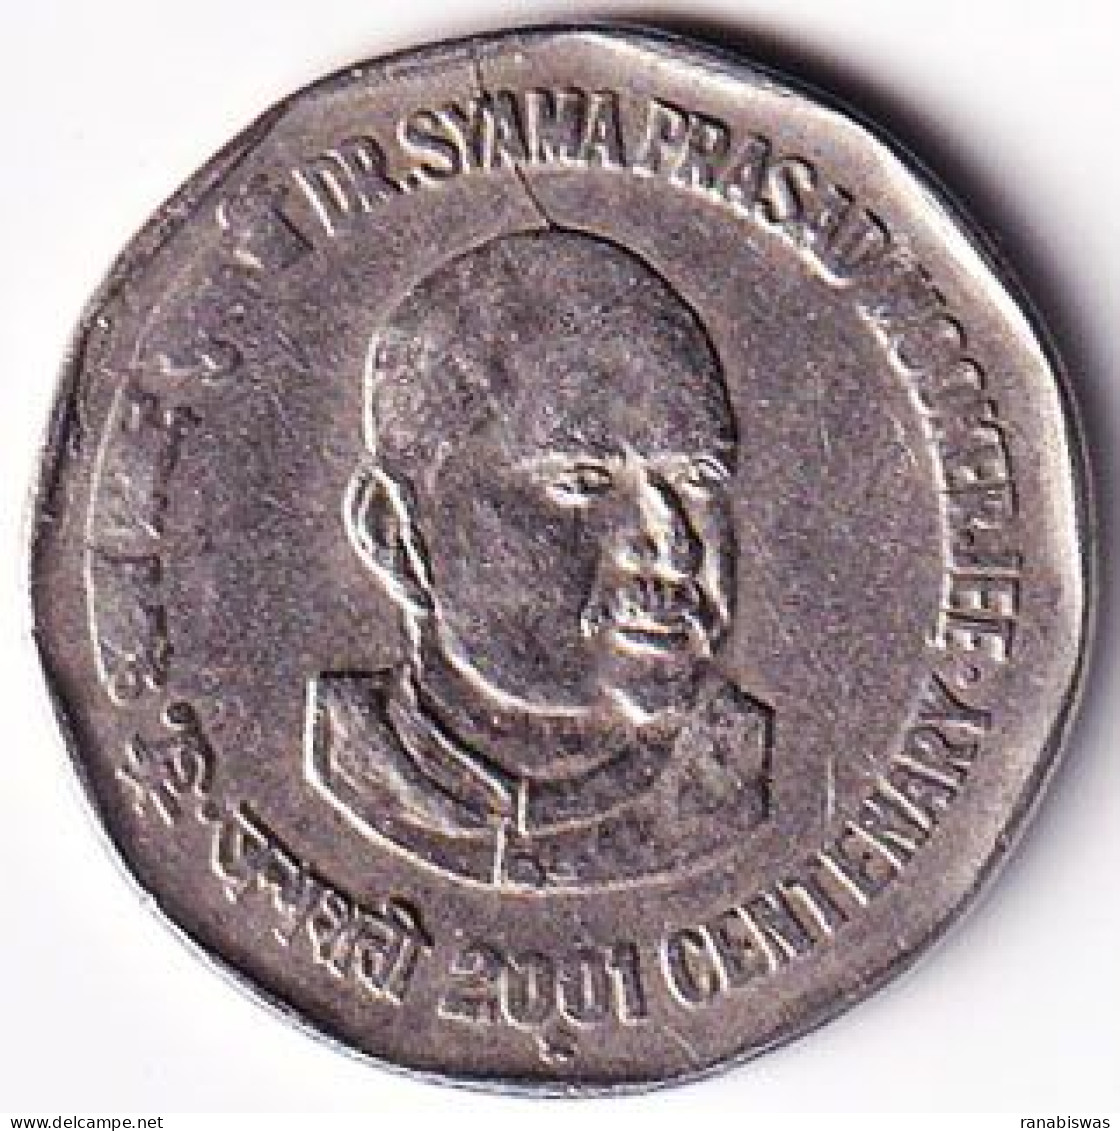 INDIA COIN LOT 19, 2 RUPEES 2001, DR. SHYAMA PRASAD MOOKERJEE, HYDERABAD MINT, XF, SCARE - Inde